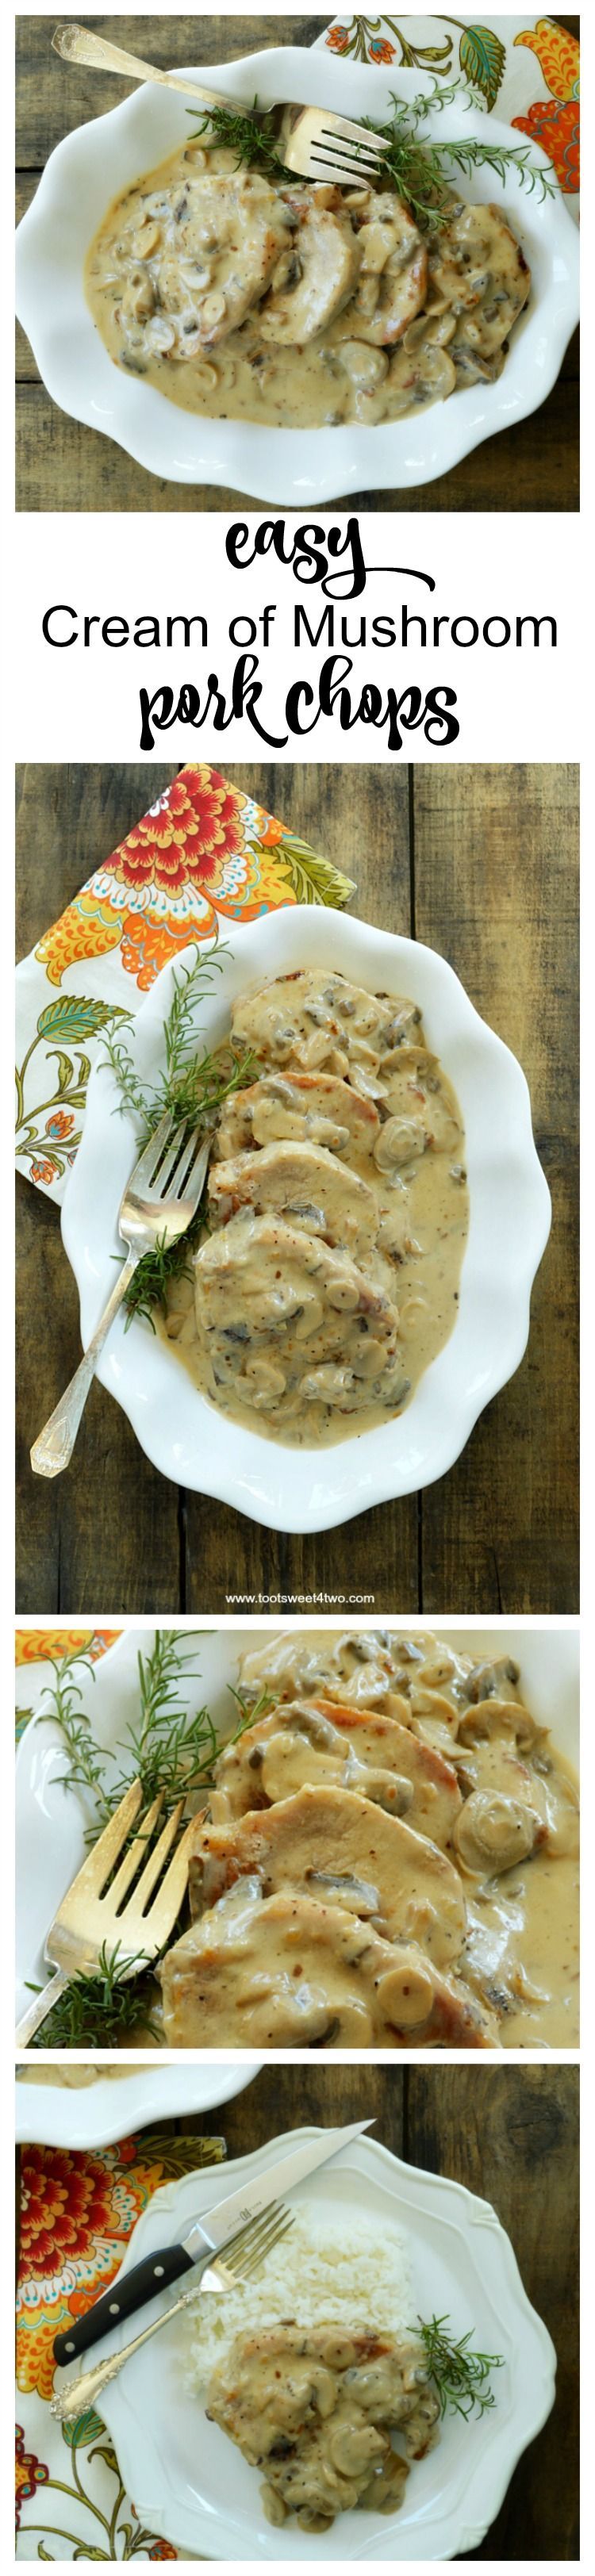 Easy Cream of Mushroom Pork Chops is one of those “go-to” recipes that is quick, easy and always a success! Perfect for a busy